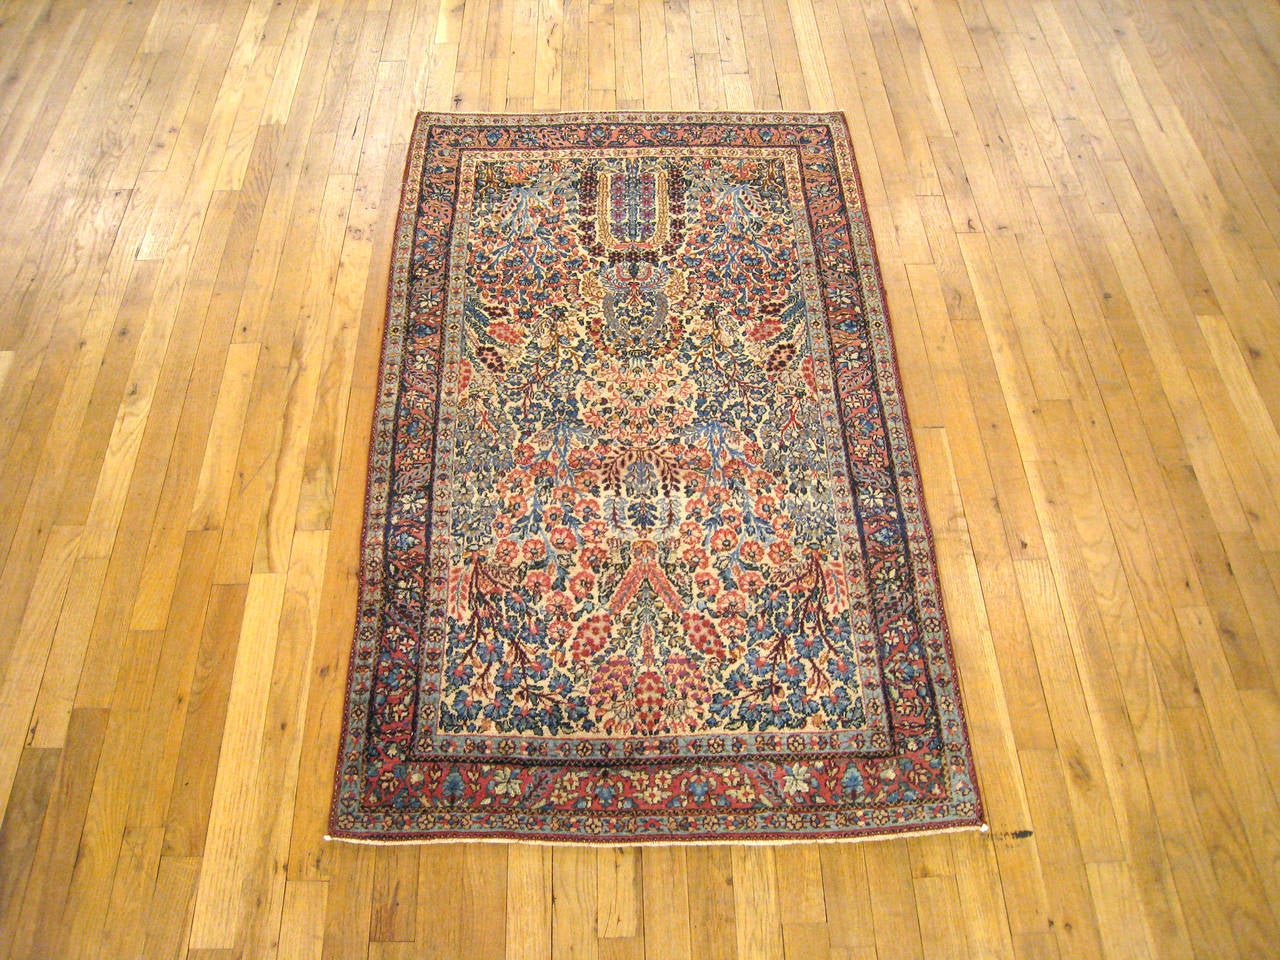 An antique Persian Kerman oriental rug, circa 1900, size 5' x 3'. This fine hand-knotted rug features a densely populated floral central field, with a wide variety of flowering motifs filling the field from end to end. This lushly designed carpet